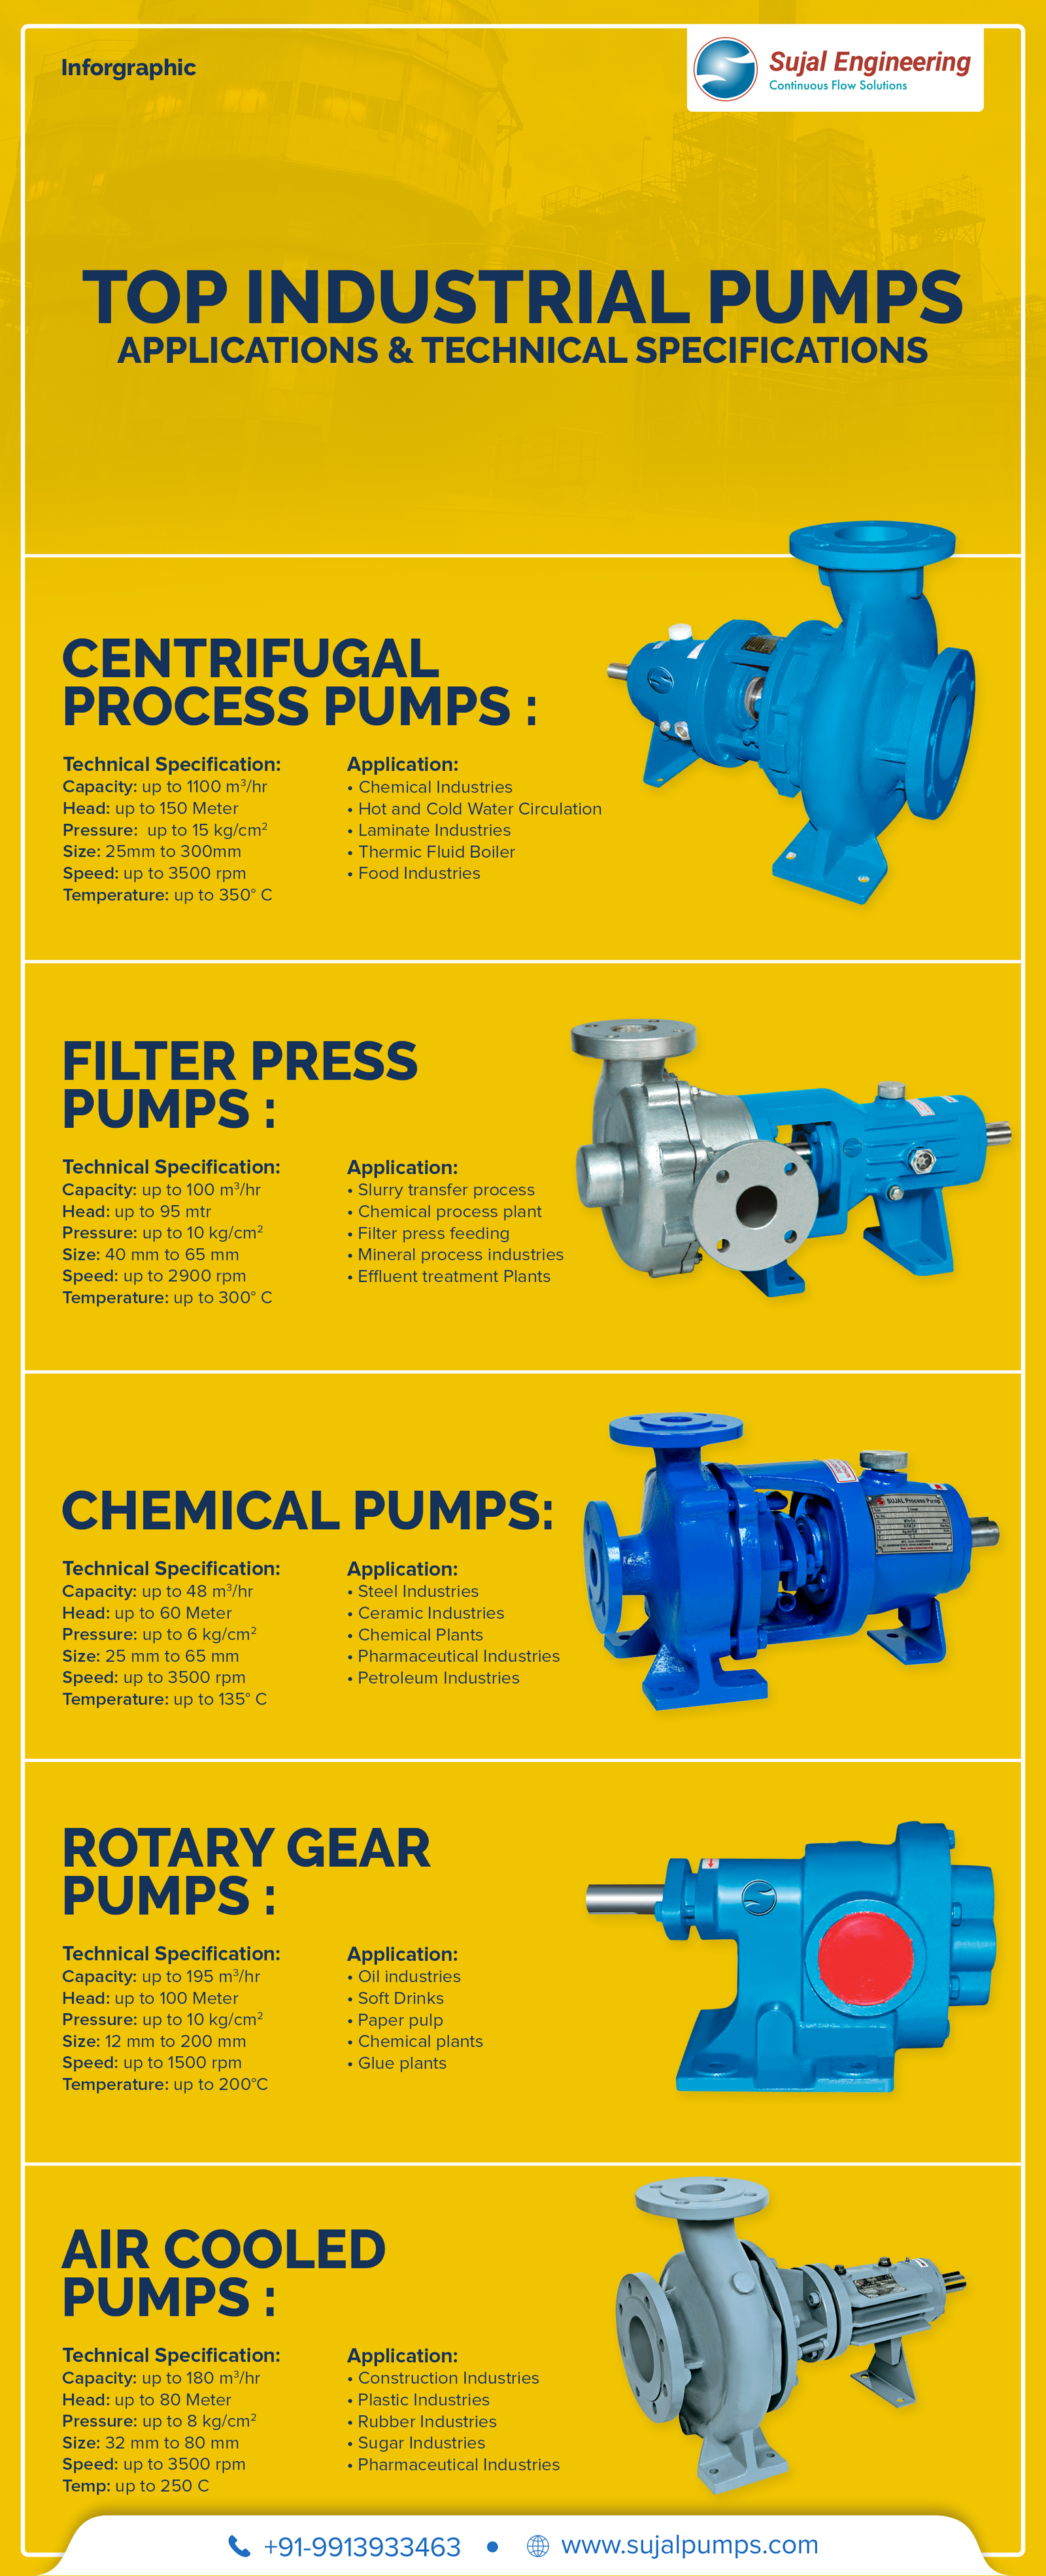 Top Industrial Pumps – Applications & Technical Specification [INFOGRAPHIC]